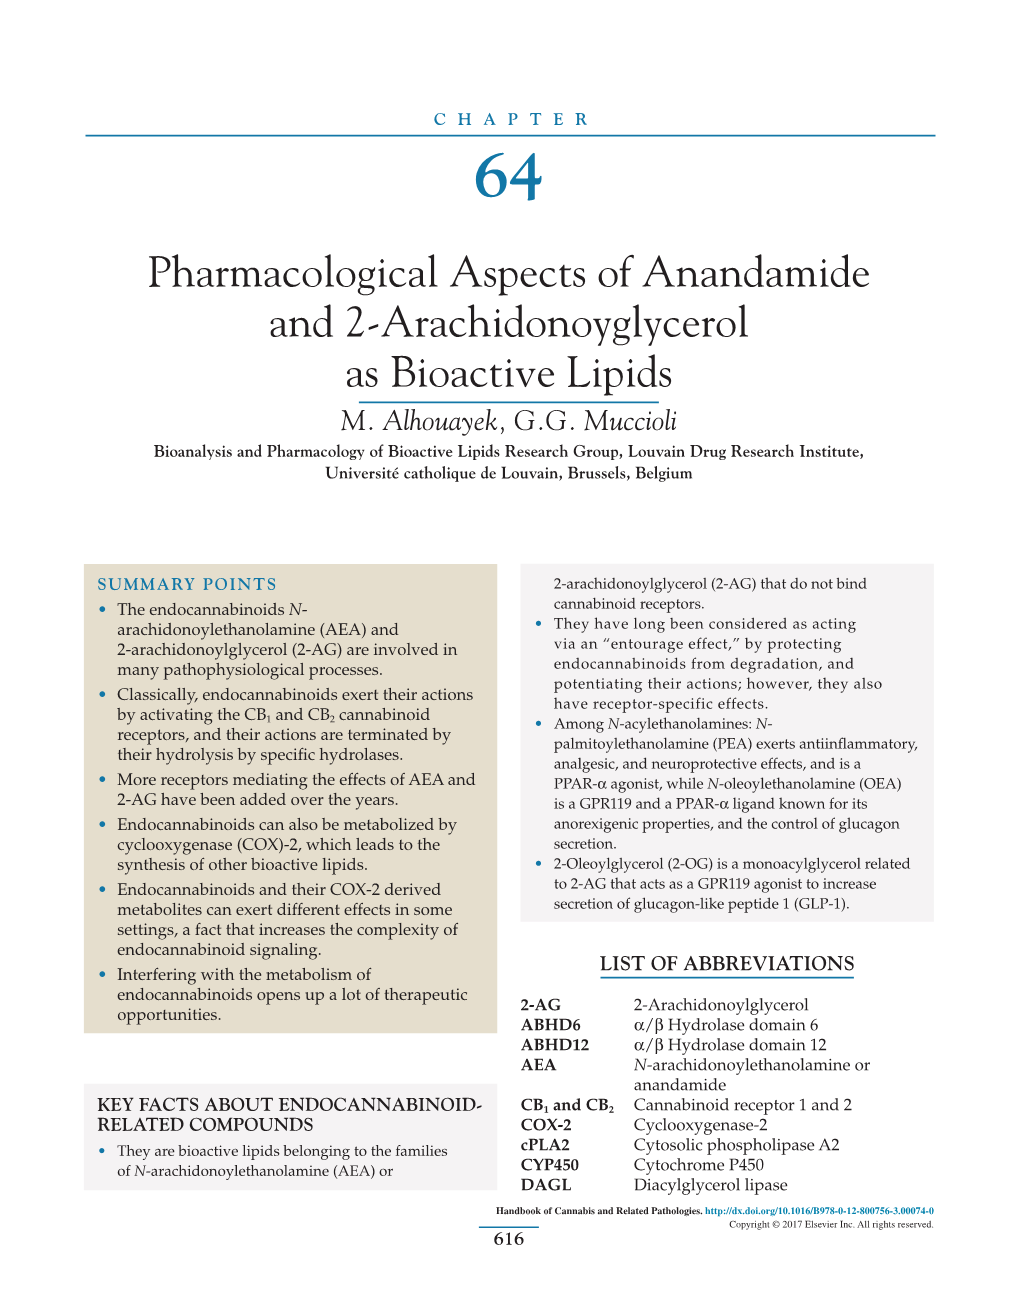 CHAPTER 64 Pharmacological Aspects of Anandamide and 2-Arachidonoyglycerol As Bioactive Lipids M